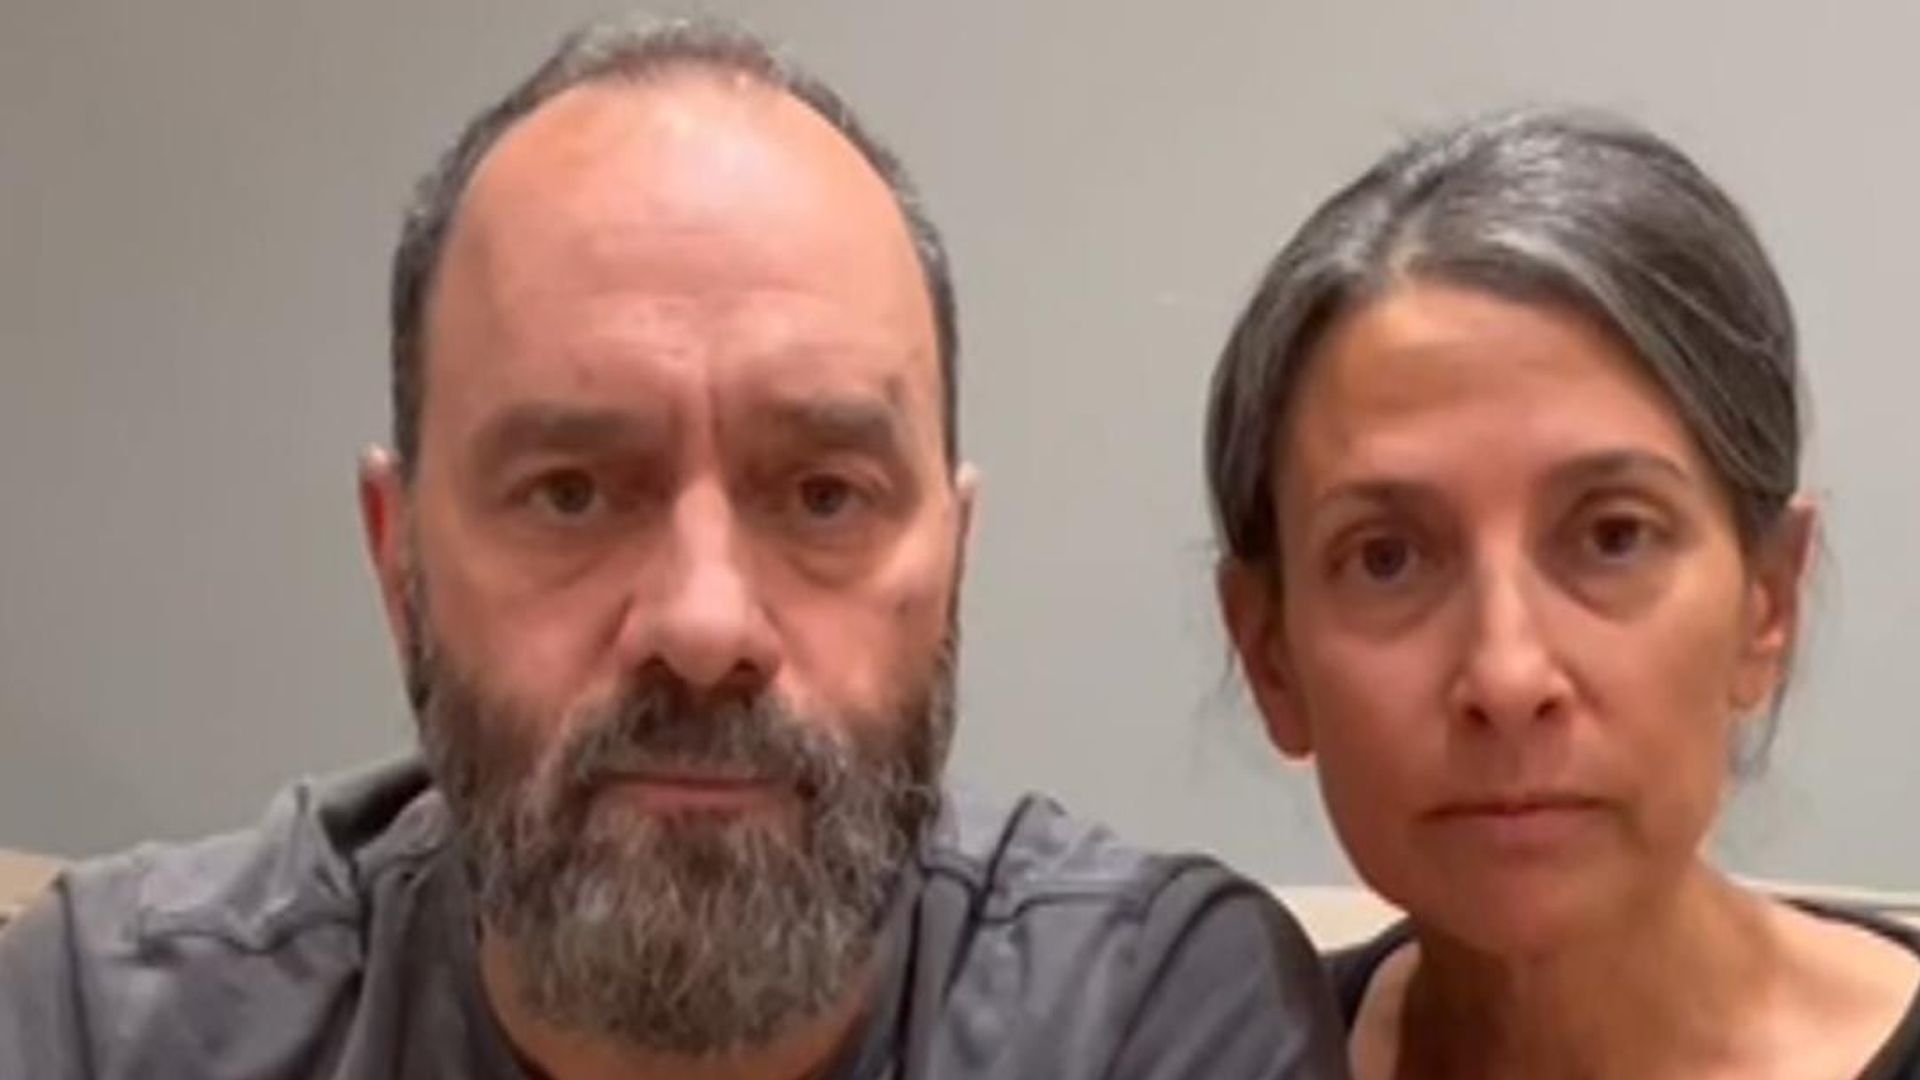 Hostage's parents tell him to 'stay strong' after video shows him missing part of arm